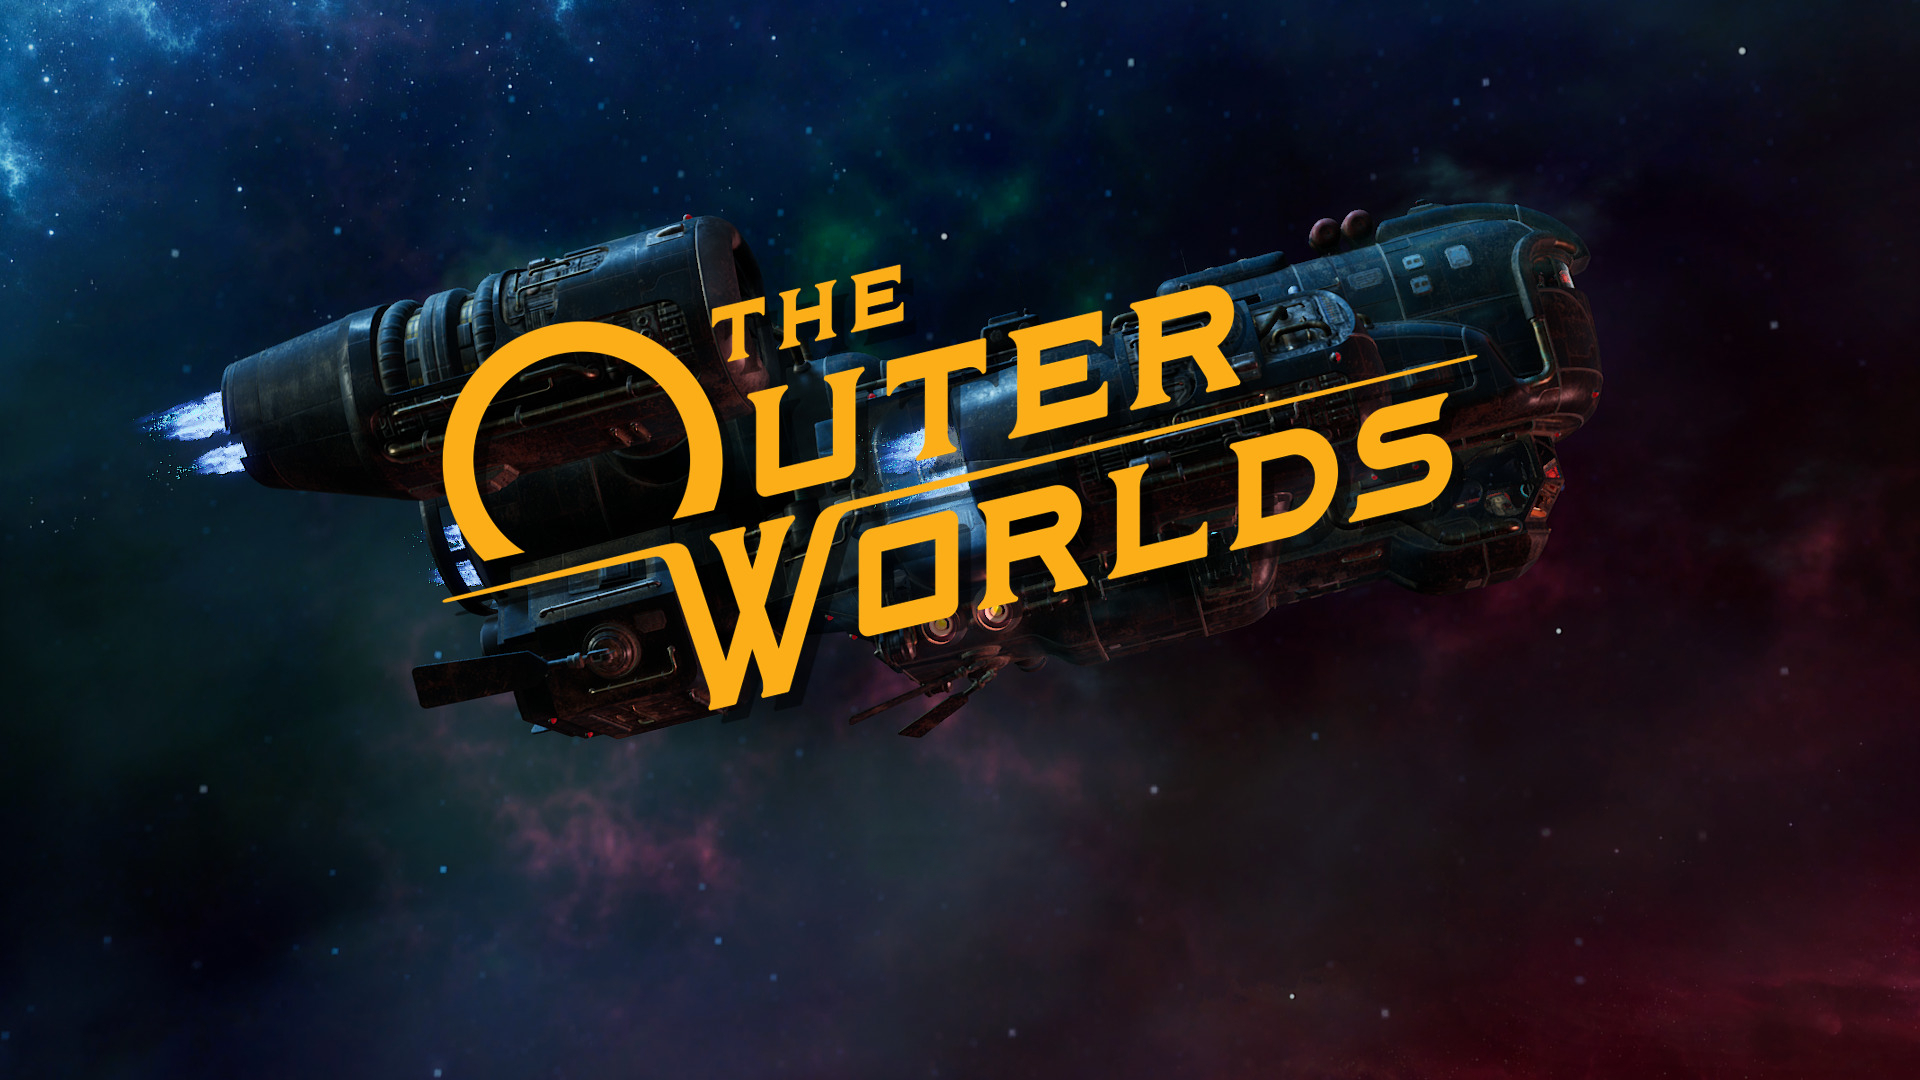 download the new for apple The Outer Worlds: Spacer